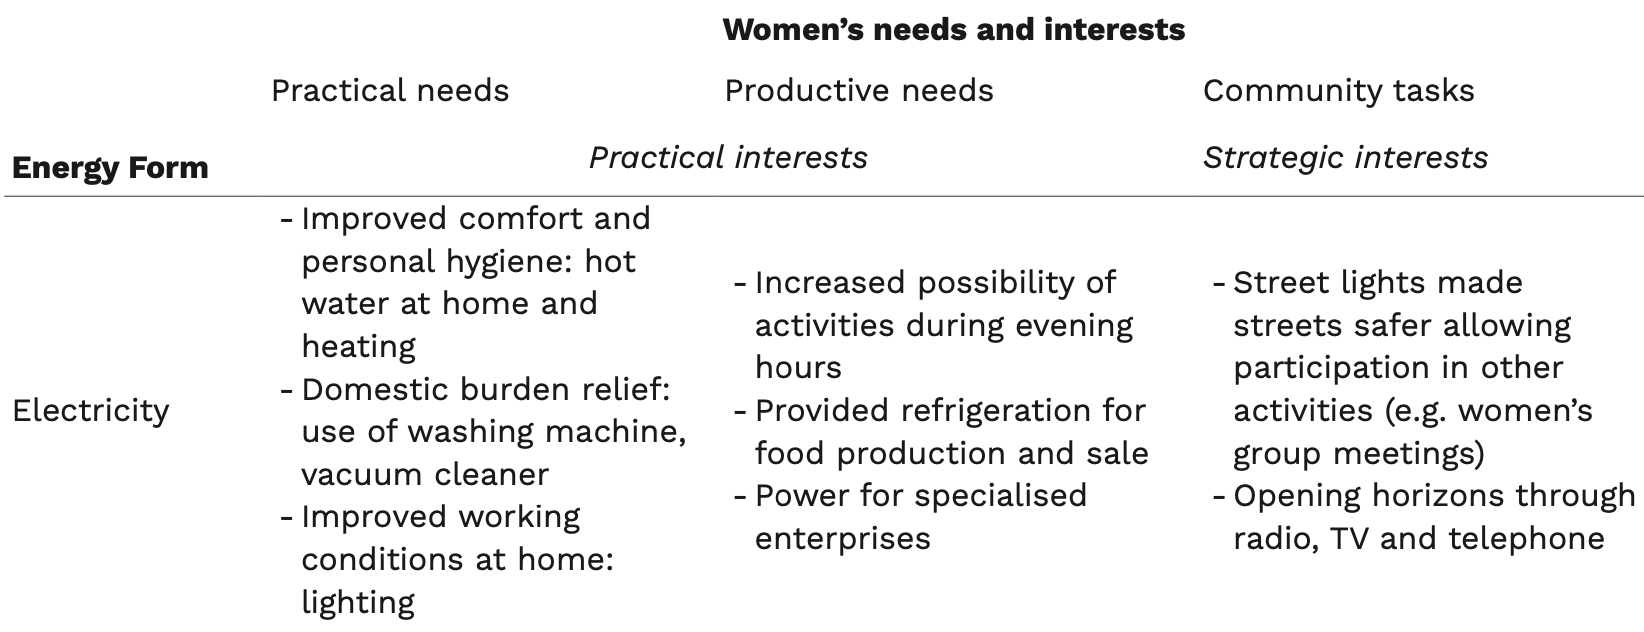 Table 1: Examples of electricity uptake in the 1950s addressing women’s needs and interests using the needs- based approach Source: based on Clancy, Skutsch & Batchelor, “The gender-energy-poverty nexus: finding the energy to address gender concerns in development”, 2002 (cf note 12), examples own source.